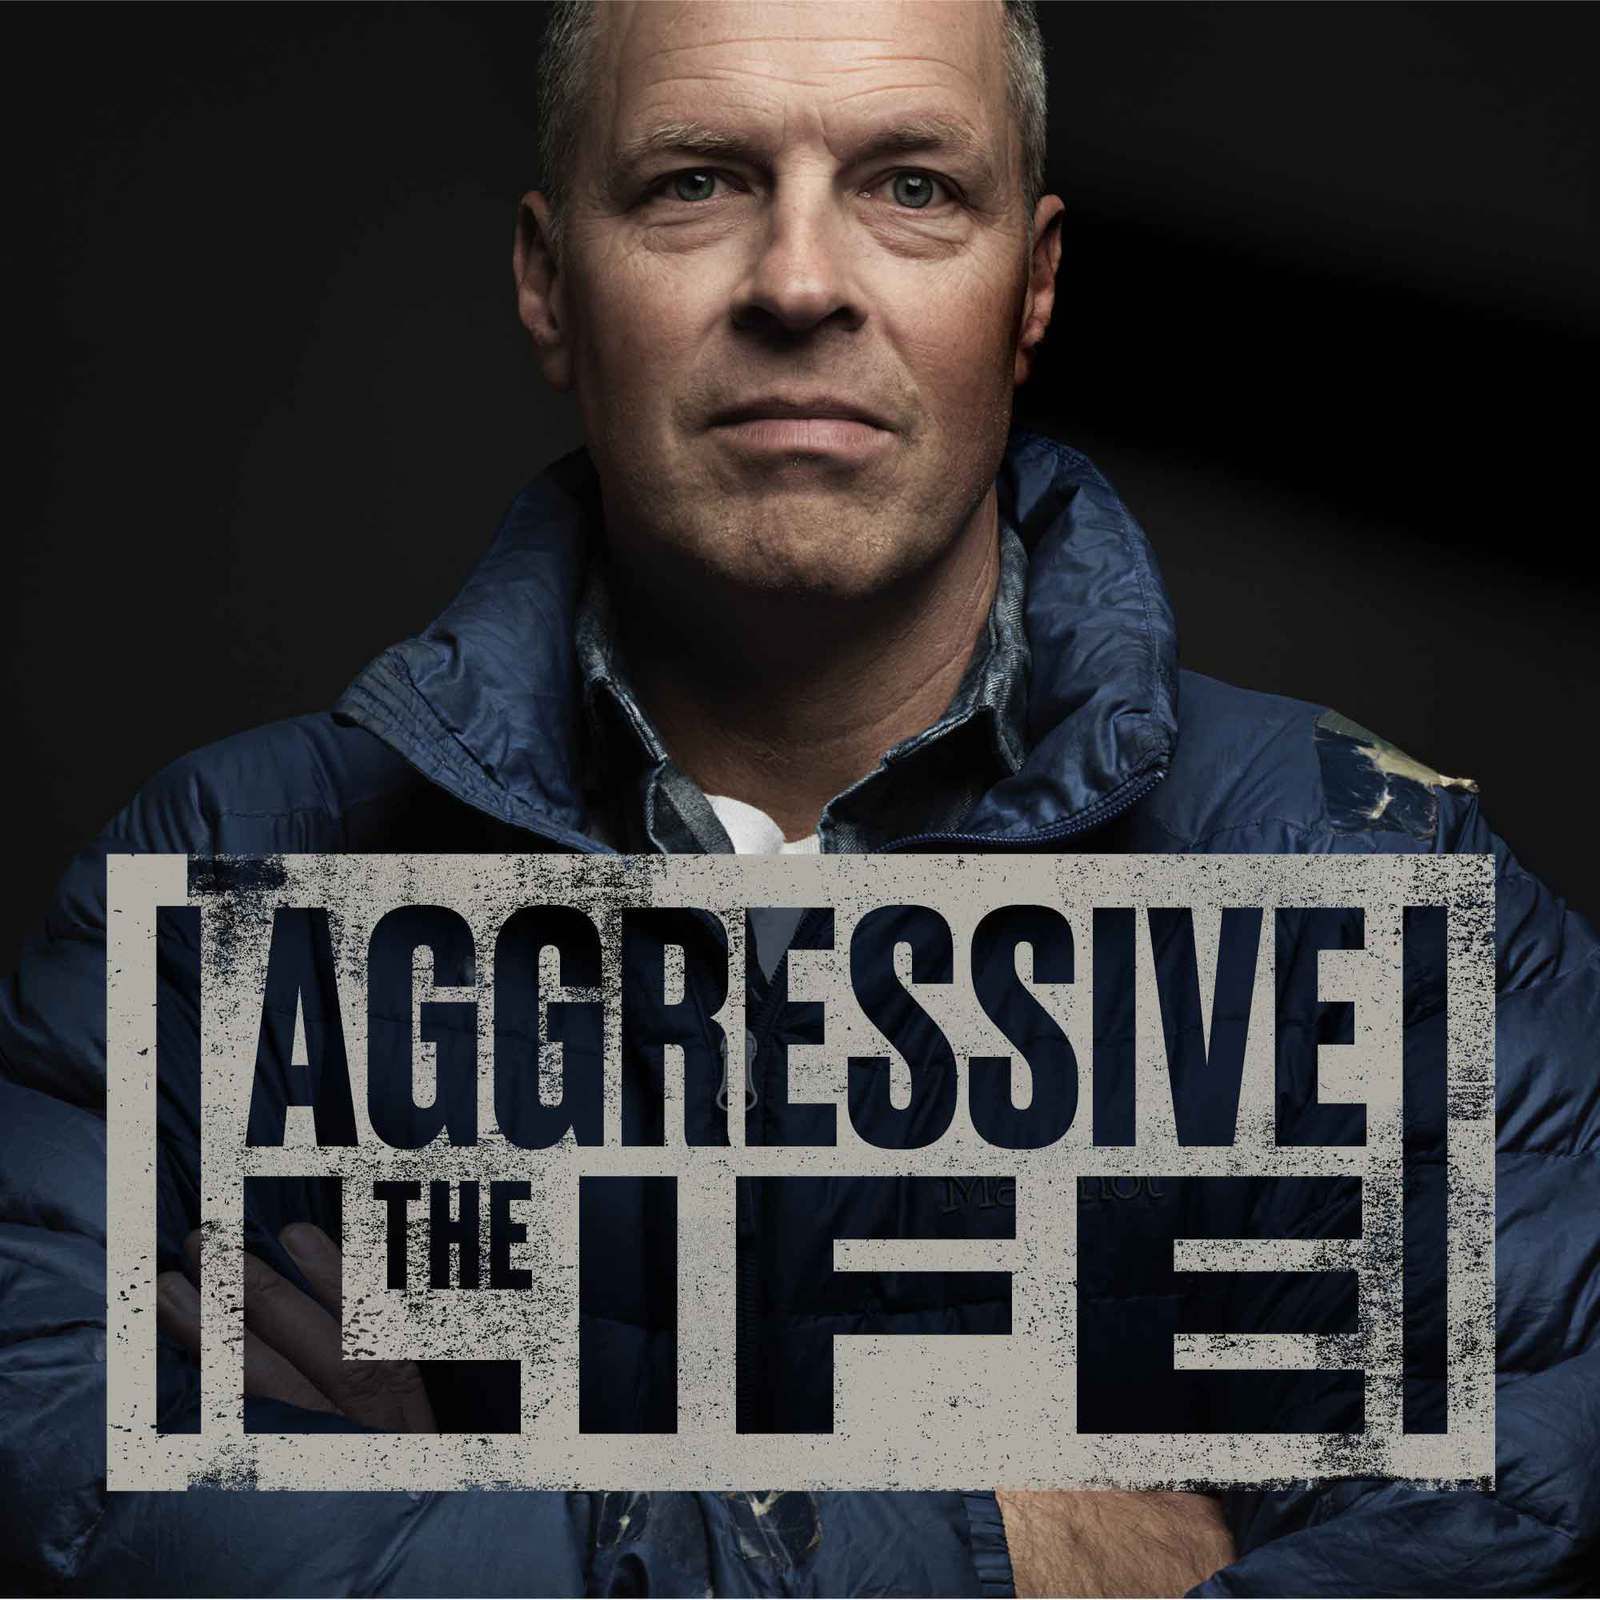 Episode 0: What is The Aggressive Life?